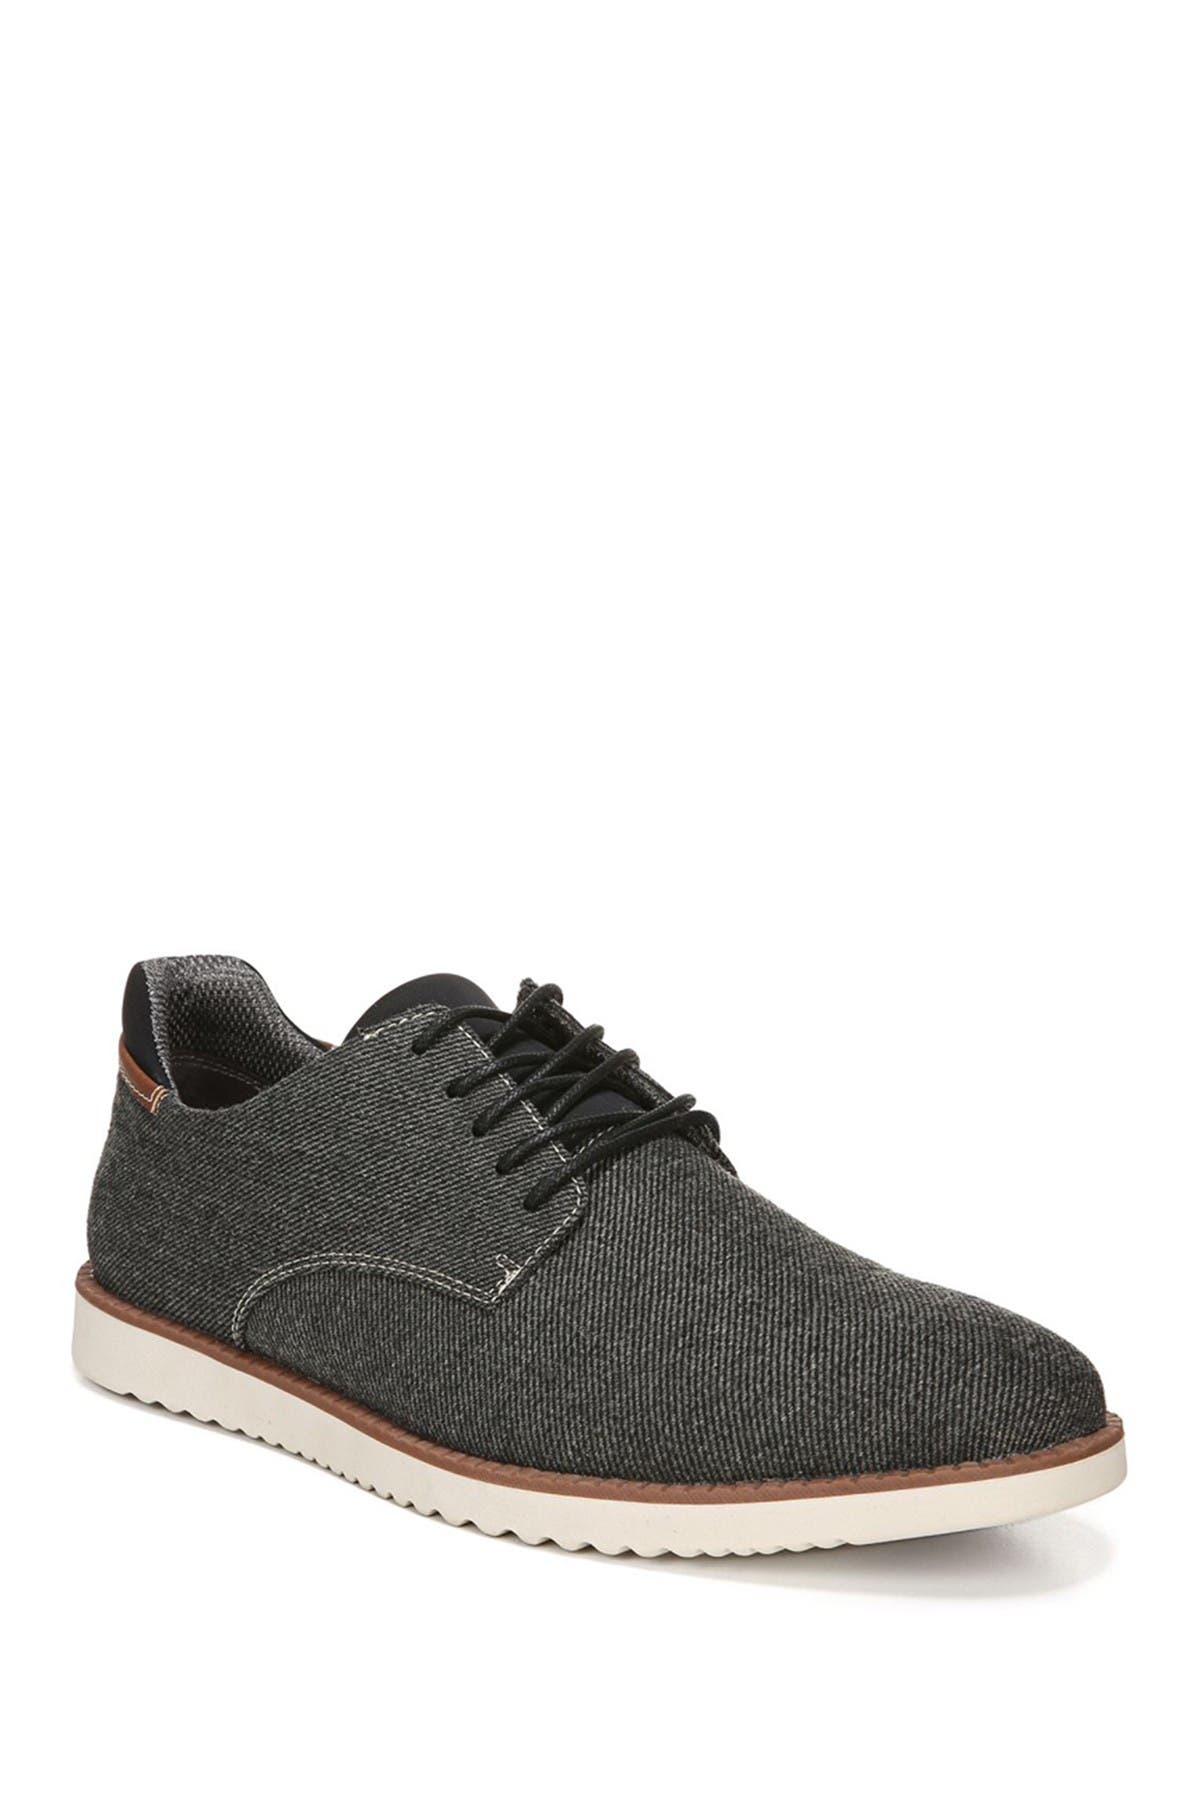 Sync Lace-Up Shoe | Nordstrom Rack